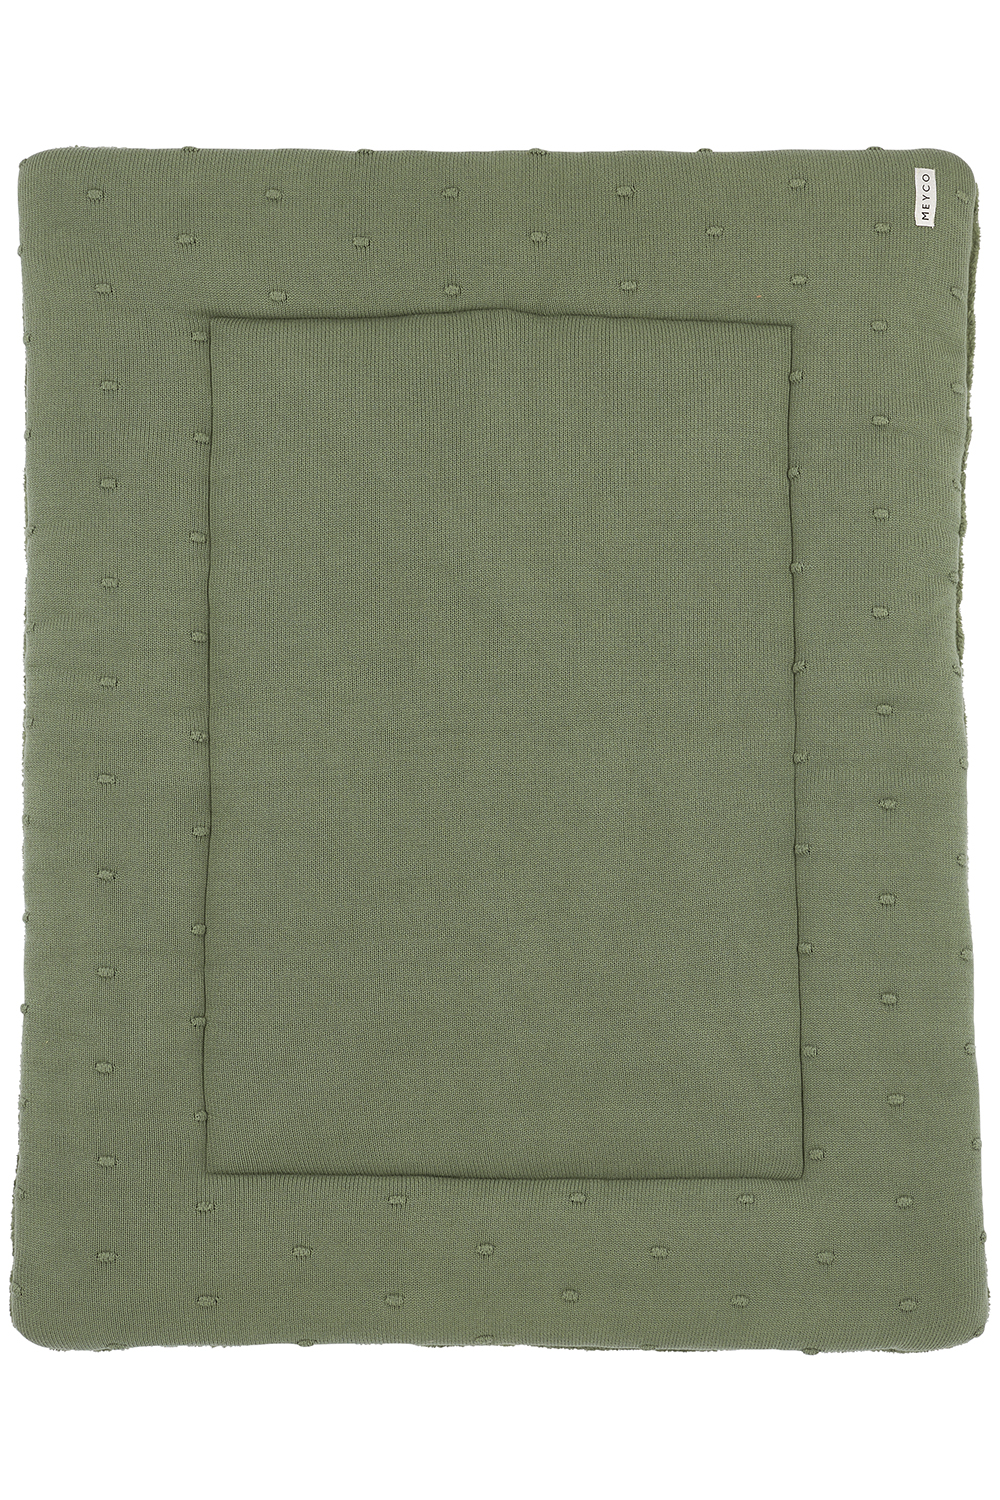 Boxkleed - forest green - 77x97cm